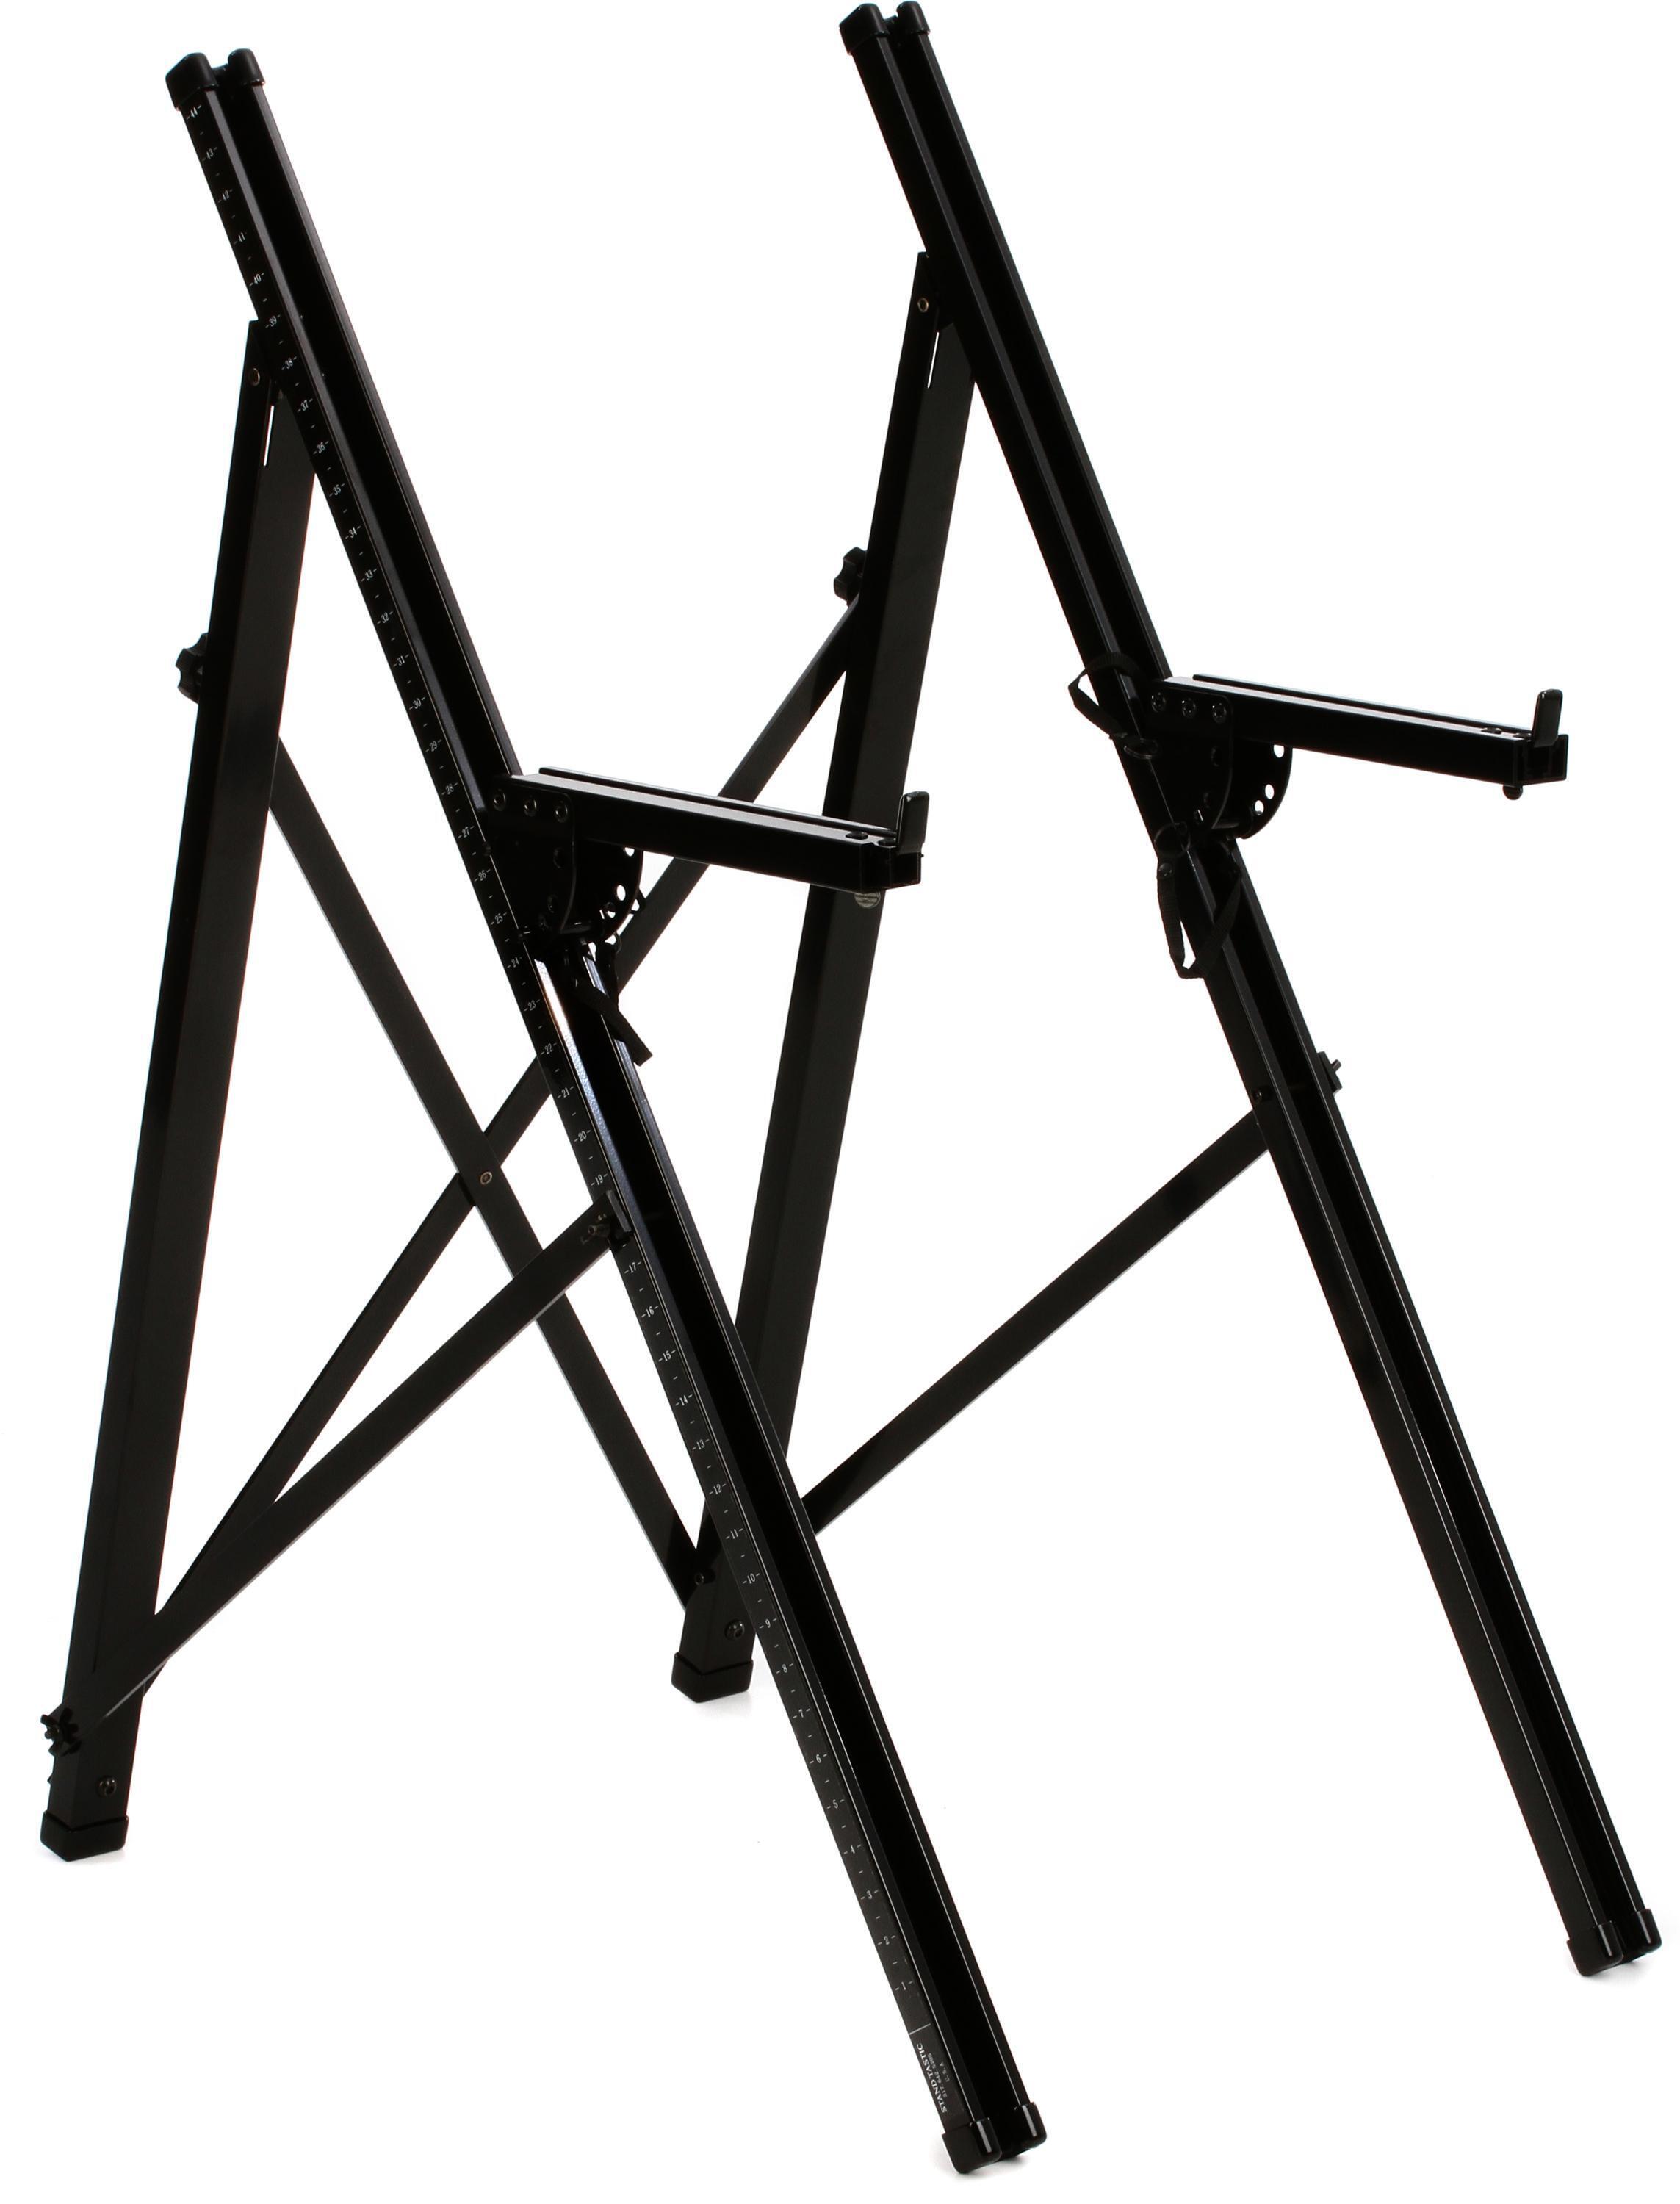 On-Stage WS8550 Heavy-Duty Large-format T-Stand